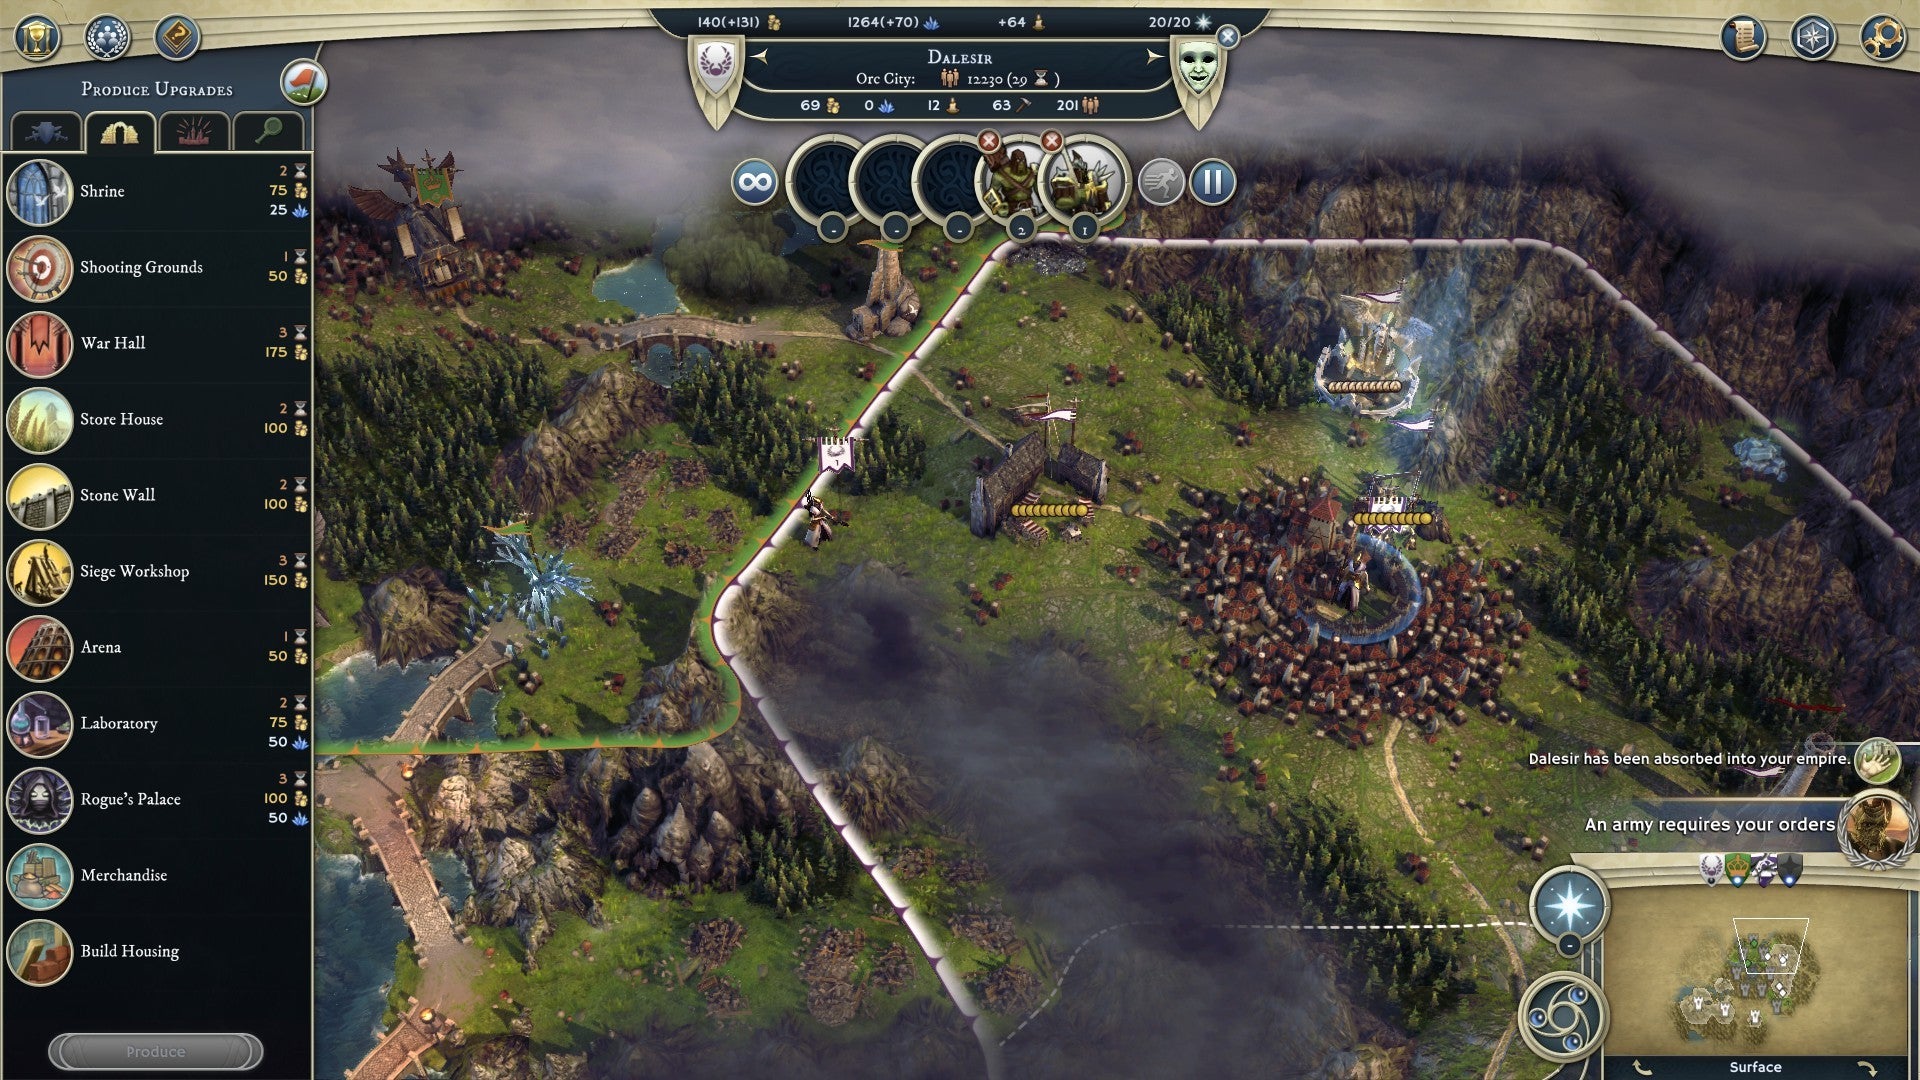 Age of Wonders III review: A horrible first impression hides wonderful strategic gameplay